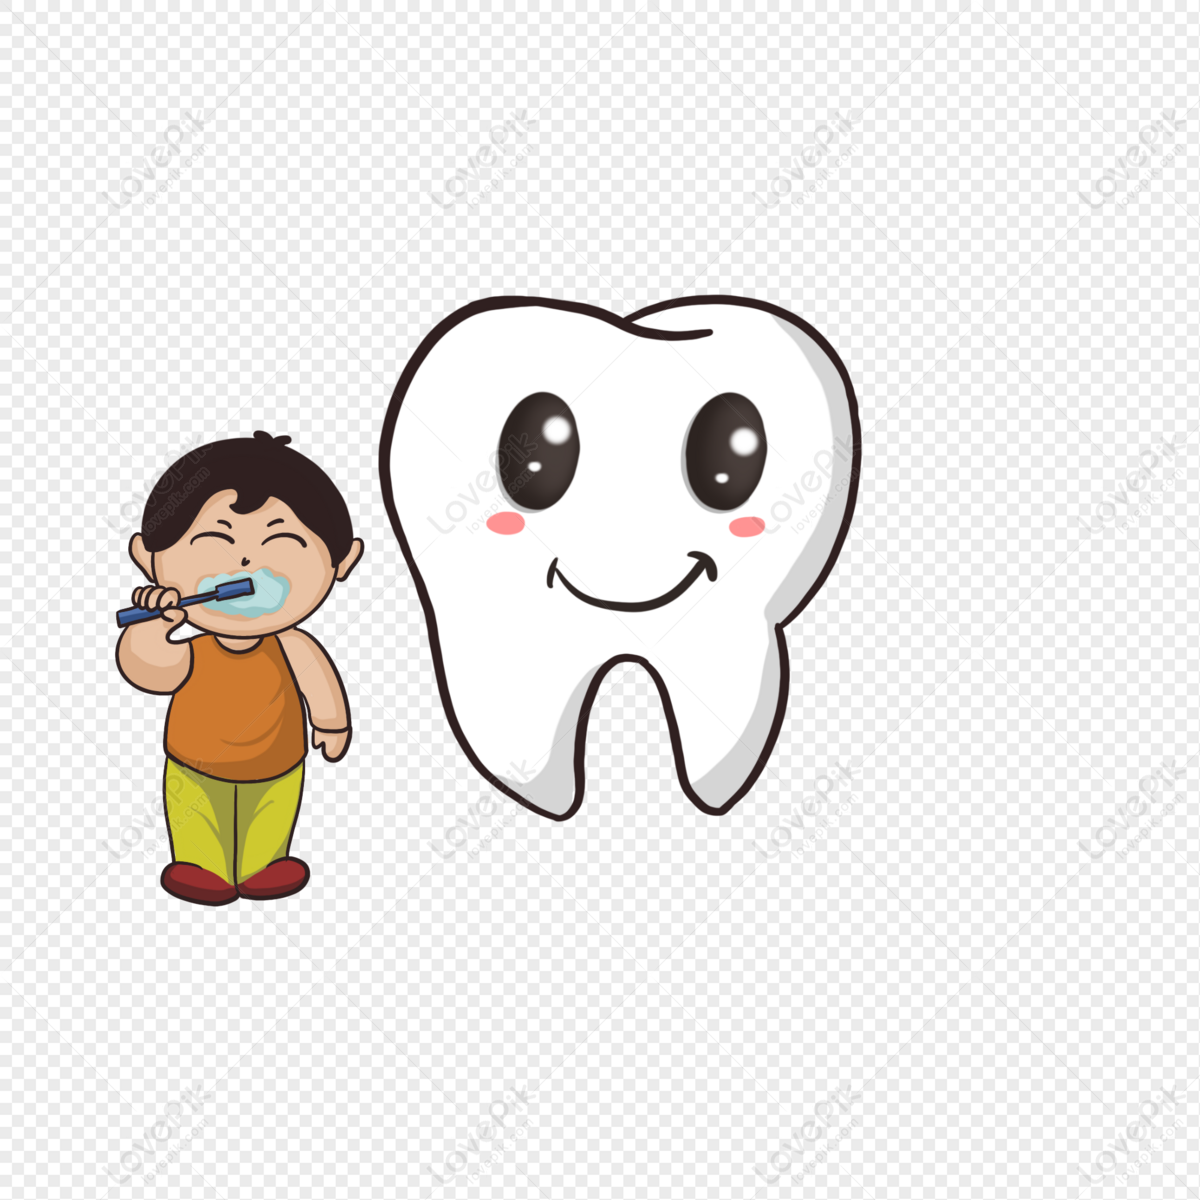 Tooth PNG Picture And Clipart Image For Free Download - Lovepik | 401791895